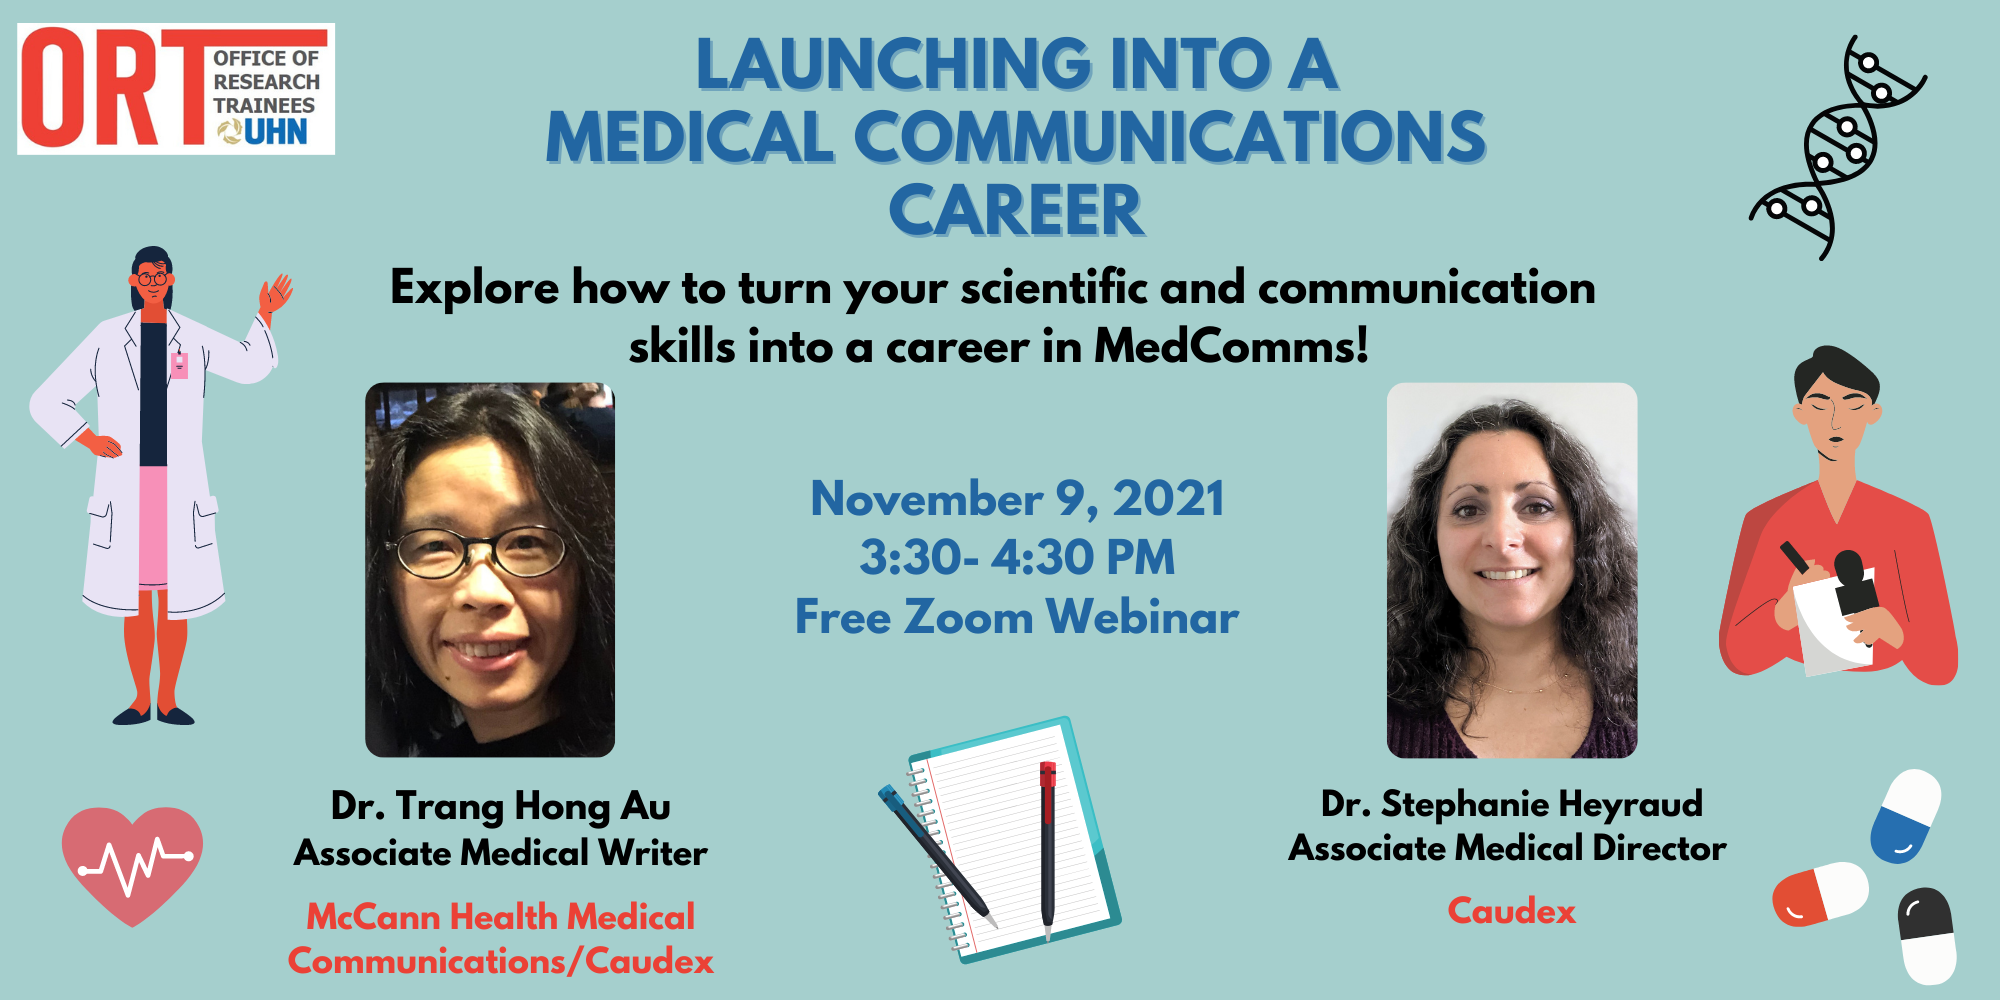 A posting for the ORT's event "Launching into a Medical Communications Career" in collaboration with McCann Health Medical Communications and Caudex on November 9, 2021 from 3:30-4:30 pm over Zoom. The poster includes images of the event guest speakers, Dr. Trang Hong Au, Associate Medical Writer at McCann Health/Caudex, and Dr. Stephanie Heyraud, Associate Medical Director, Caudex.